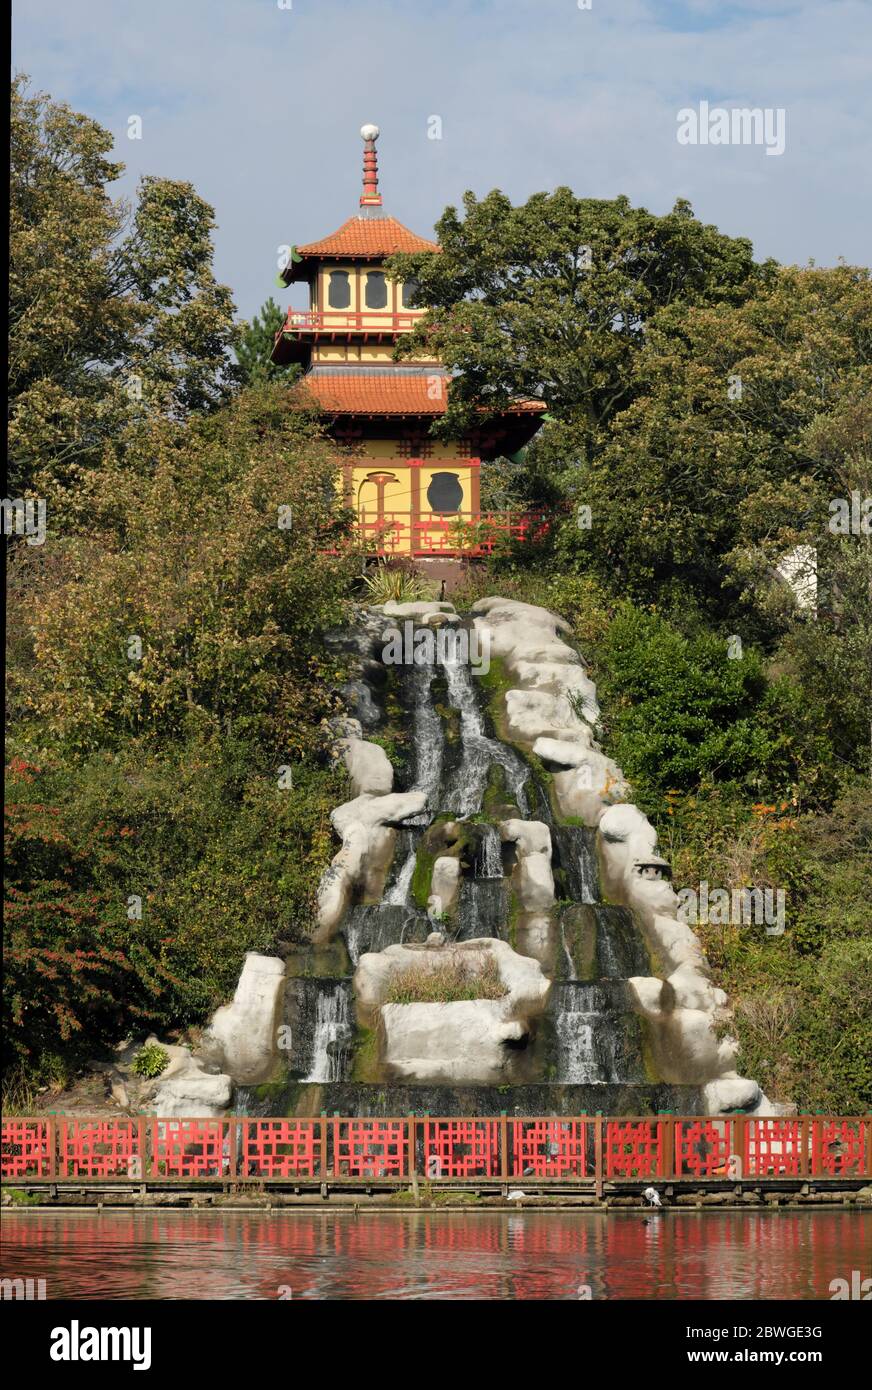 The Pagoda in Peasholm Park with a waterfall in the foreground. Scarborough Yorkshire England UK Stock Photo